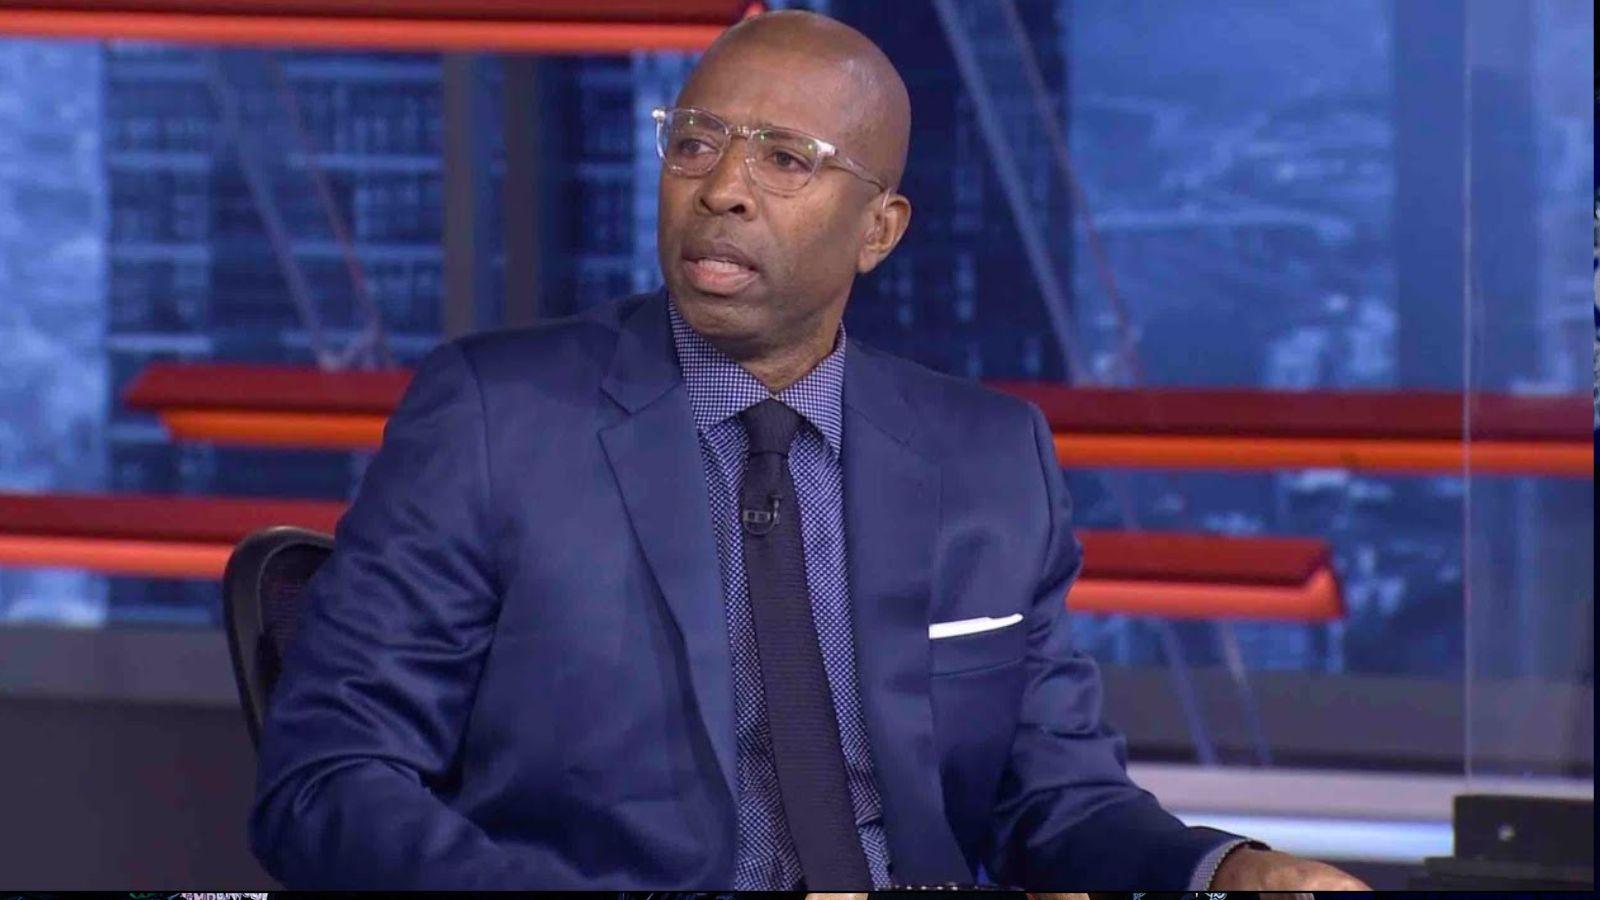 Kenny Smith on the set of TNT's Inside the NBA.